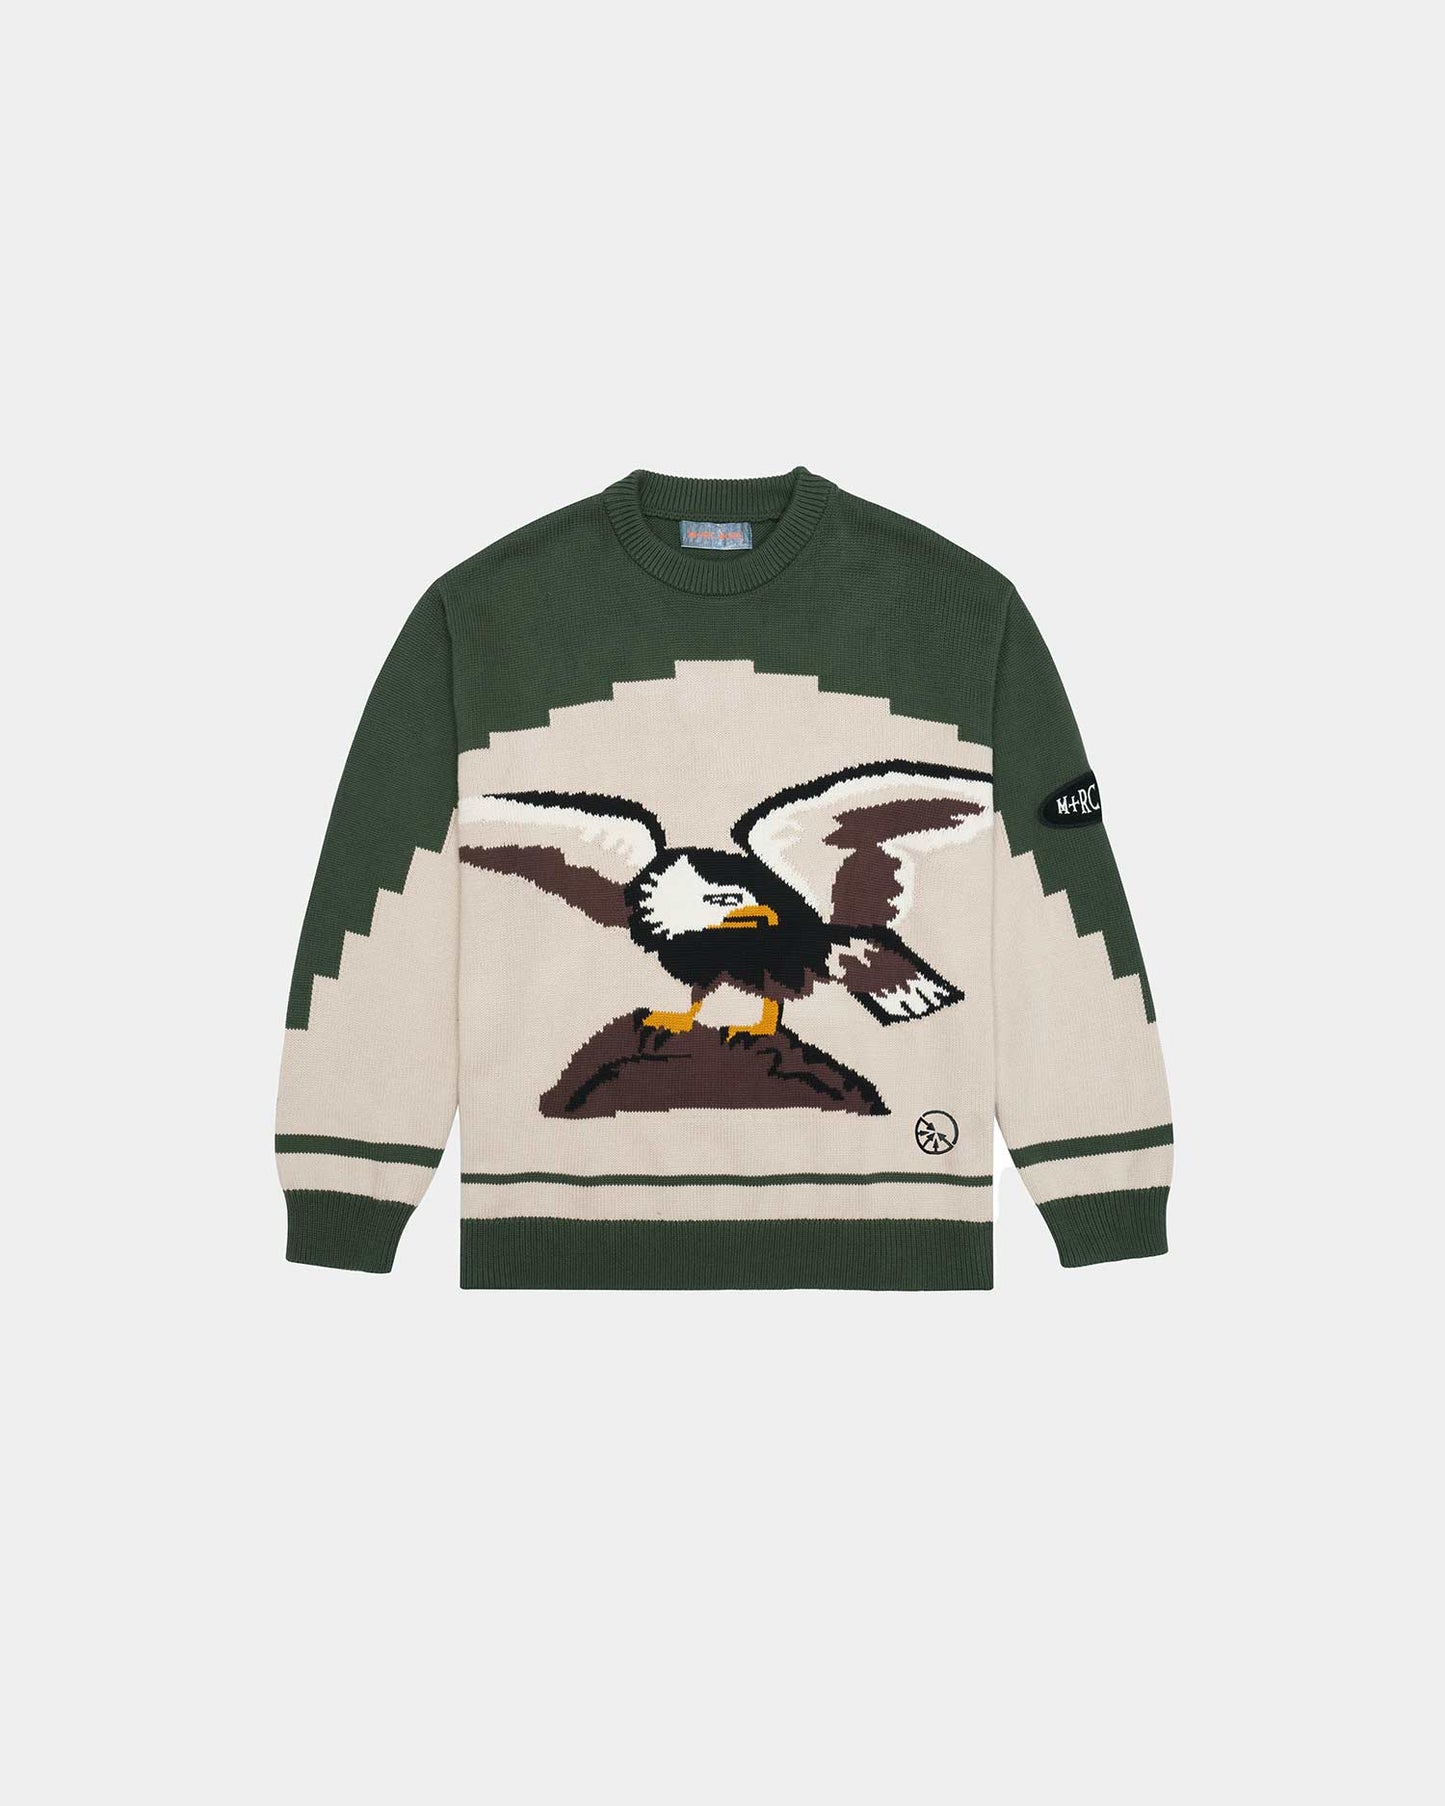 "Eagle" Knitted Beige Sweater